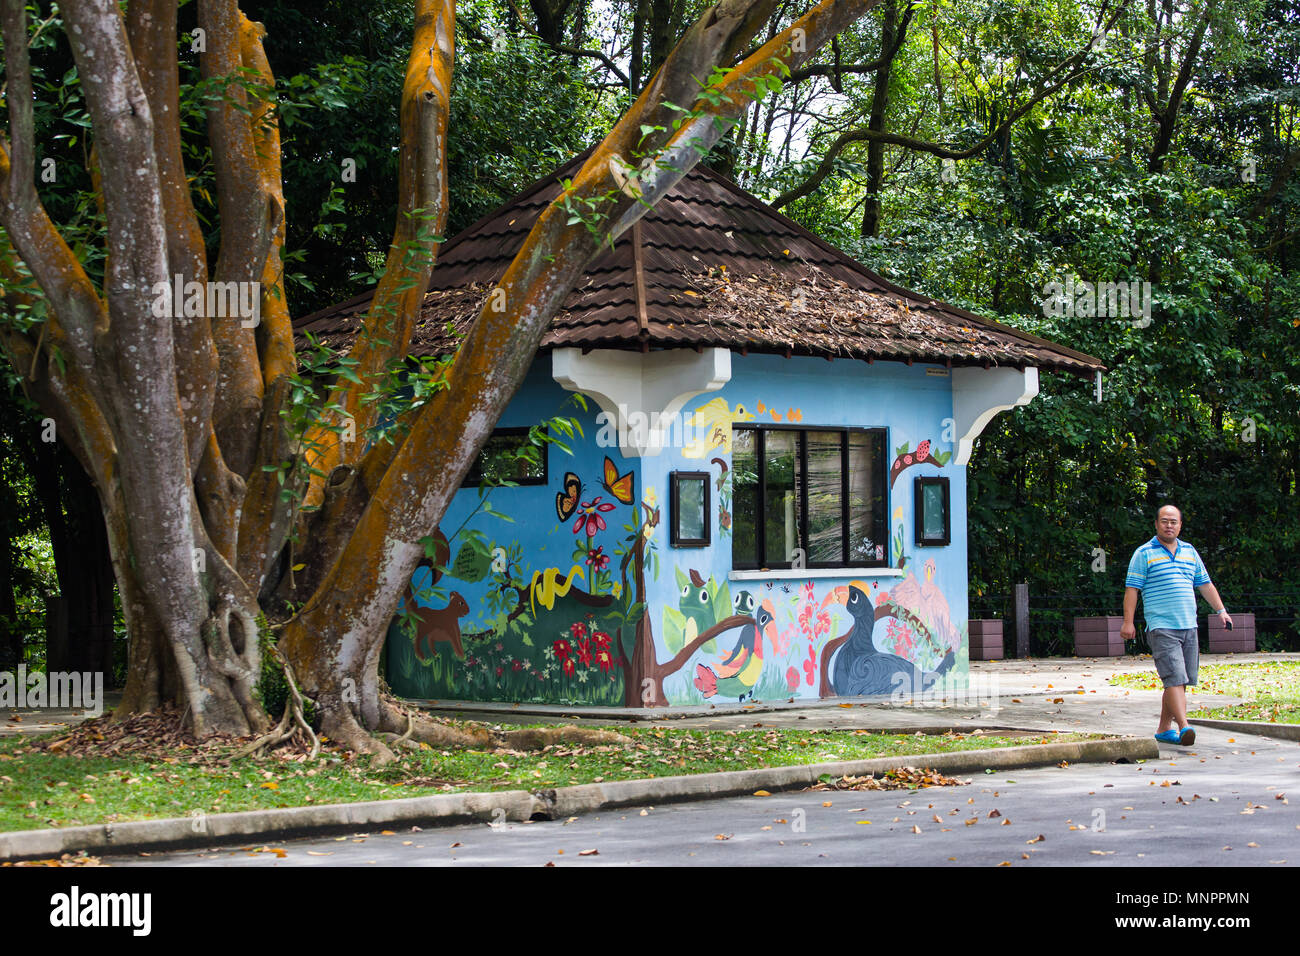 A man wearing blue shirt walking out from a colourful toilet block at Mount Faber Park, Singapore. Stock Photo